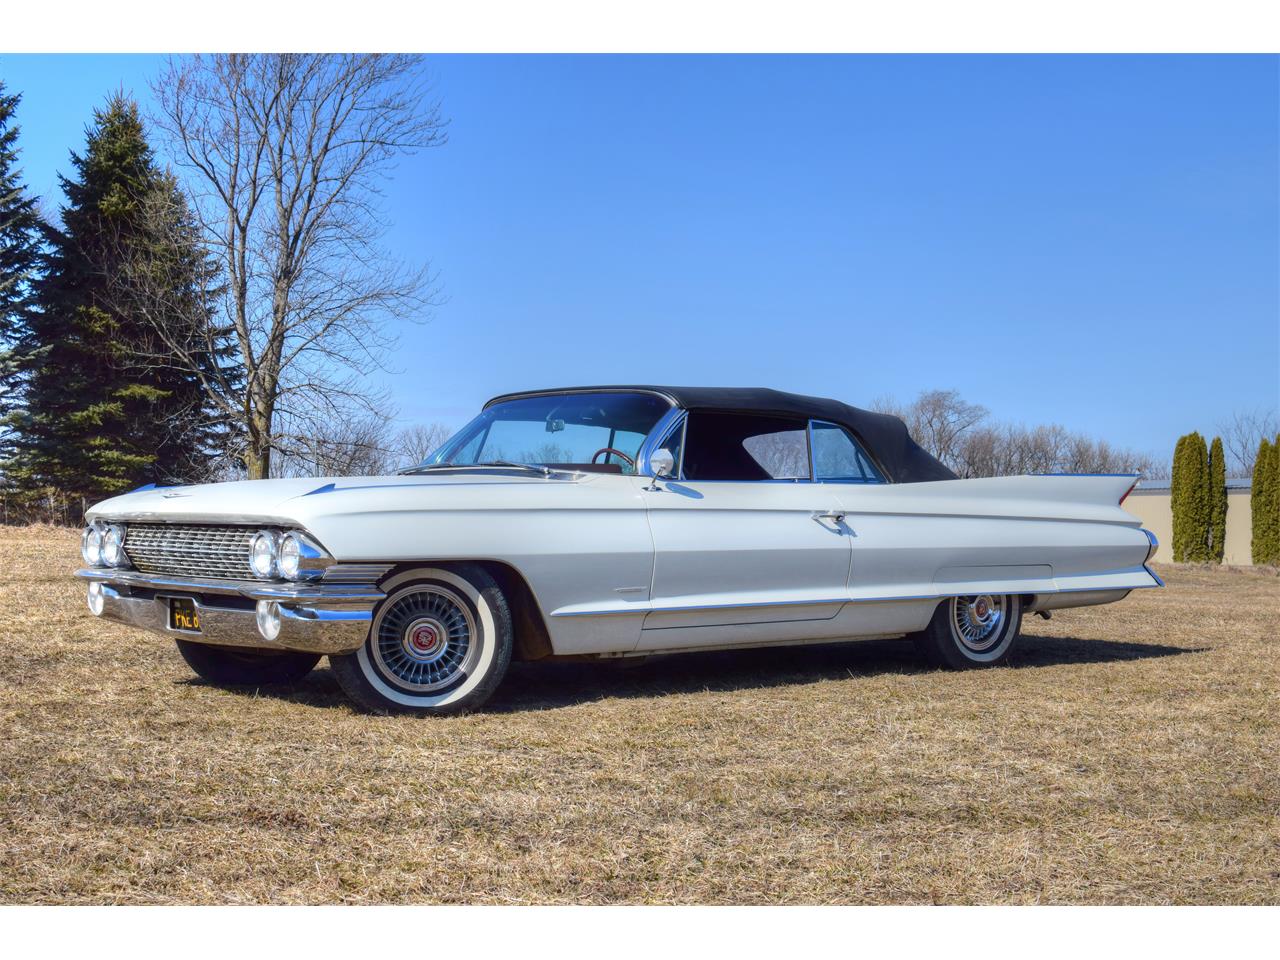 1961 cadillac convertible for sale classiccars com cc 959890 1961 cadillac convertible for sale